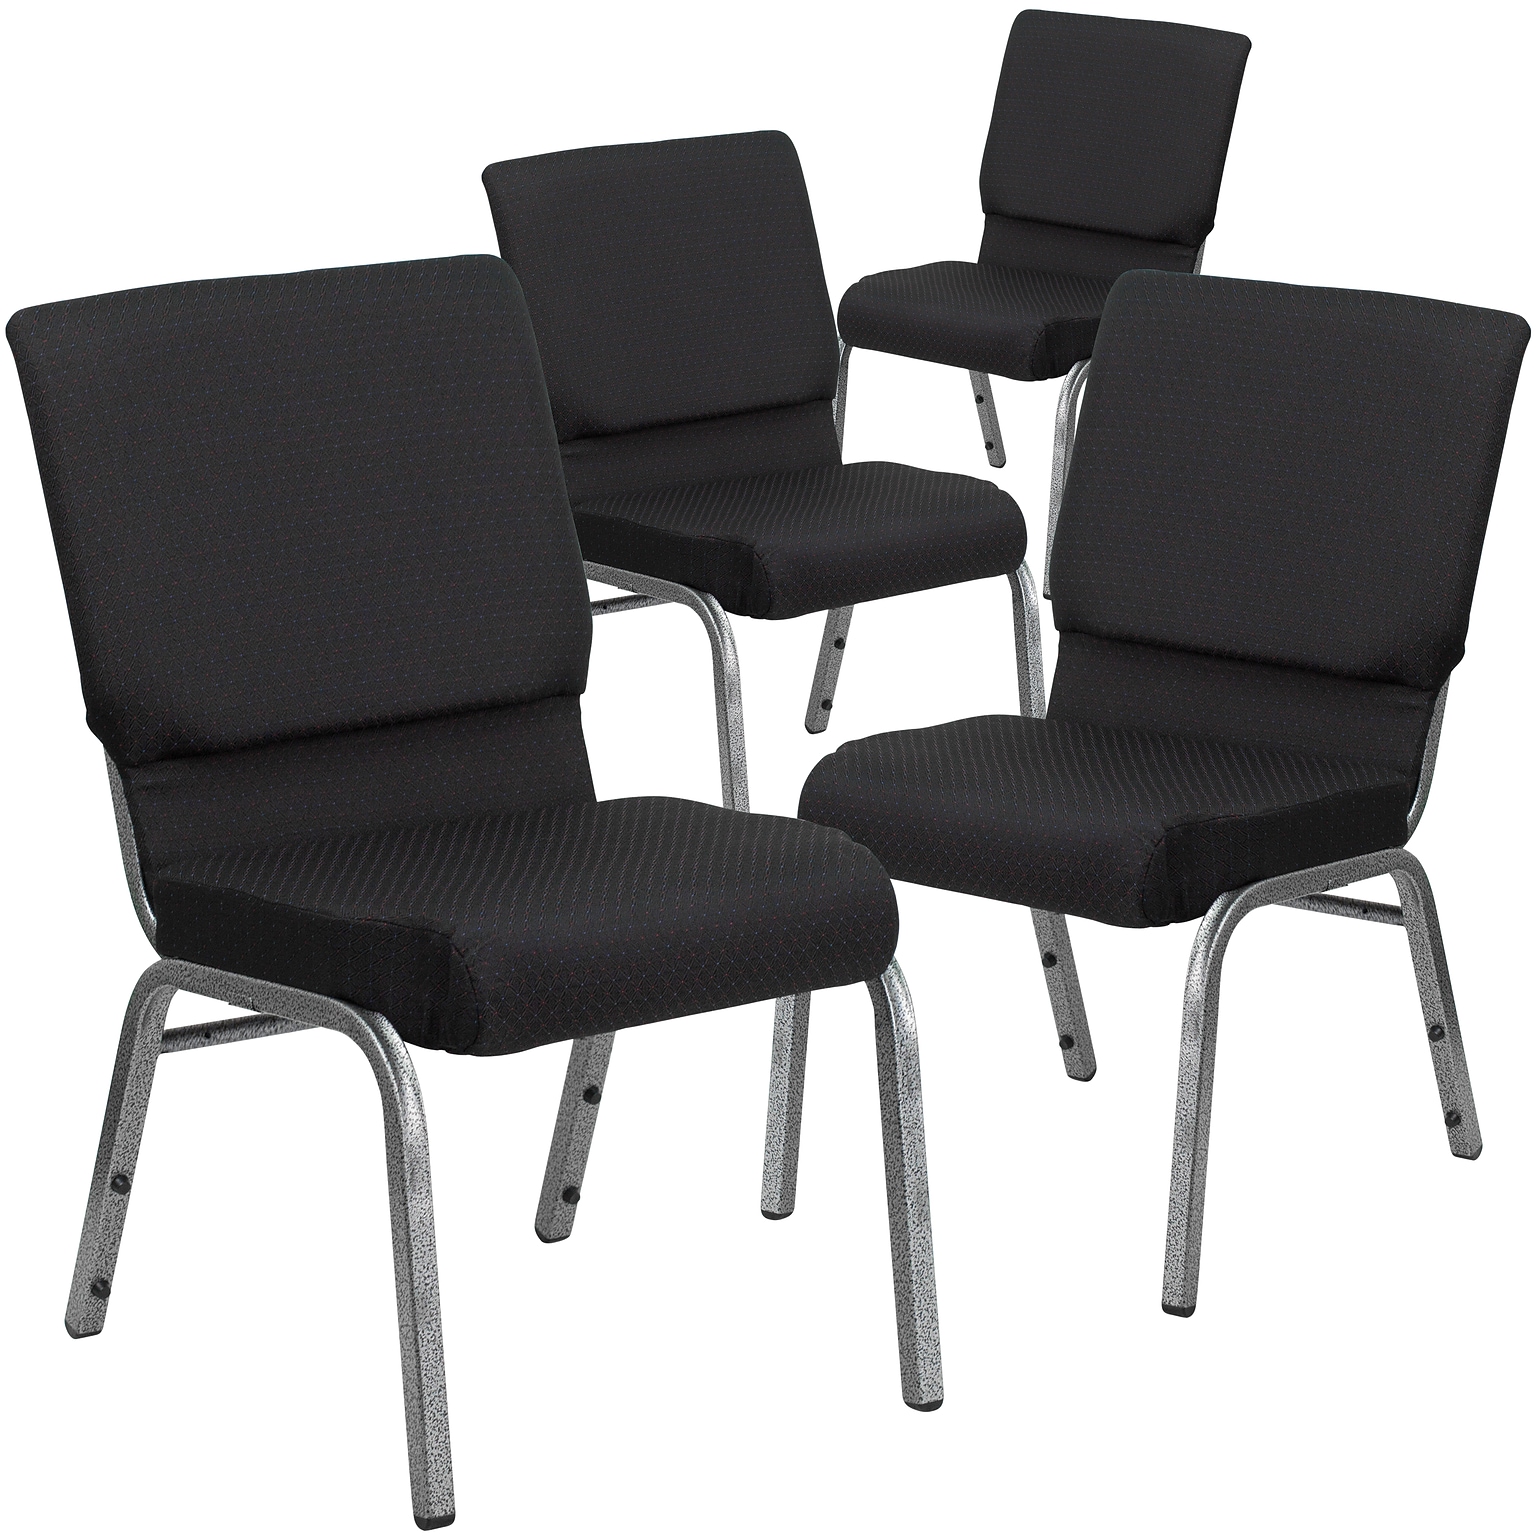 Flash Furniture HERCULES Series Fabric Church Stacking Chair, Black Patterned/Silver Vein Frame, 4 Pack (4FCH185SVJP02)